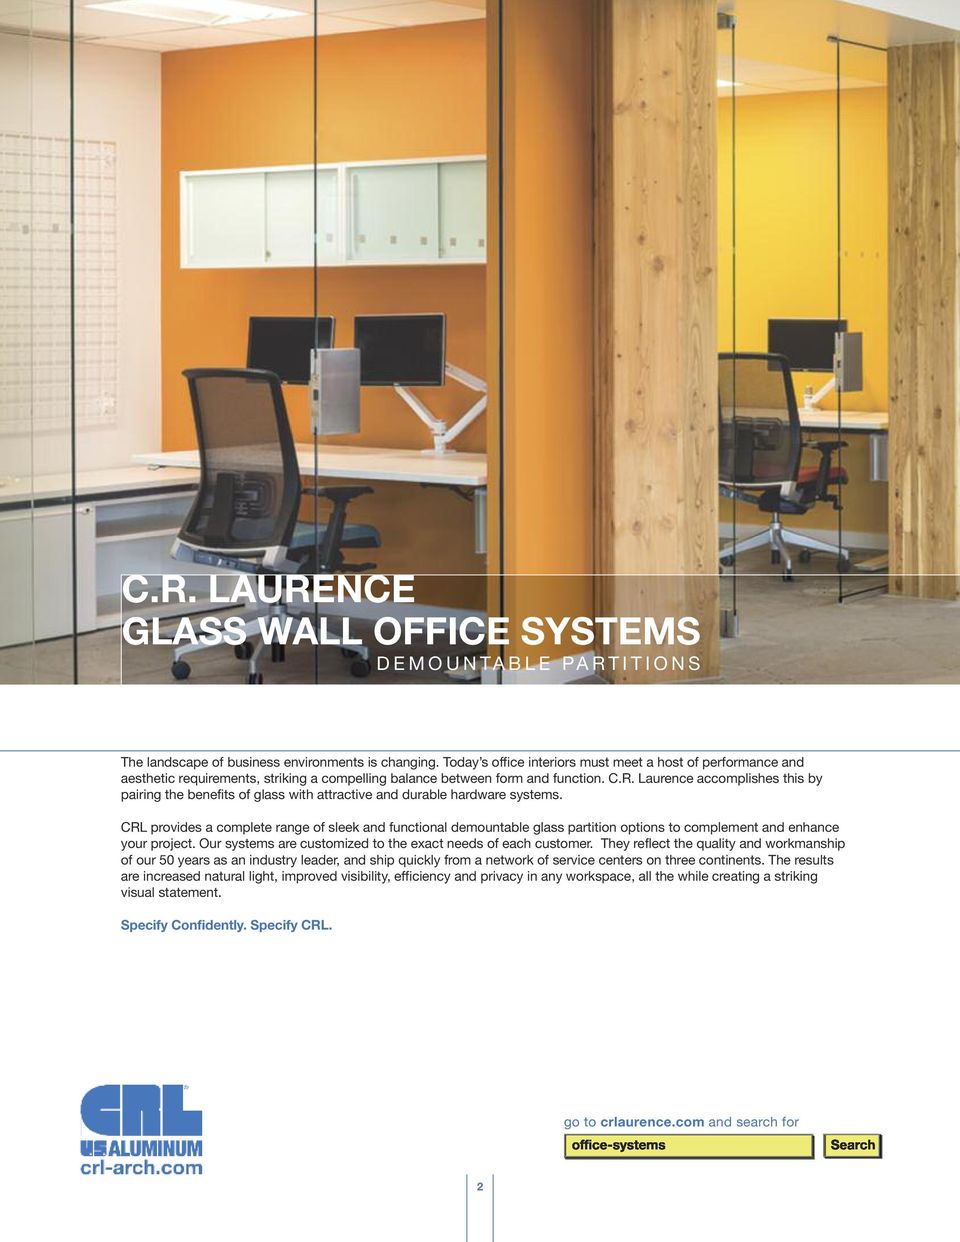 Laurence accomplishes this by pairing the benefits of glass with attractive and durable hardware systems.